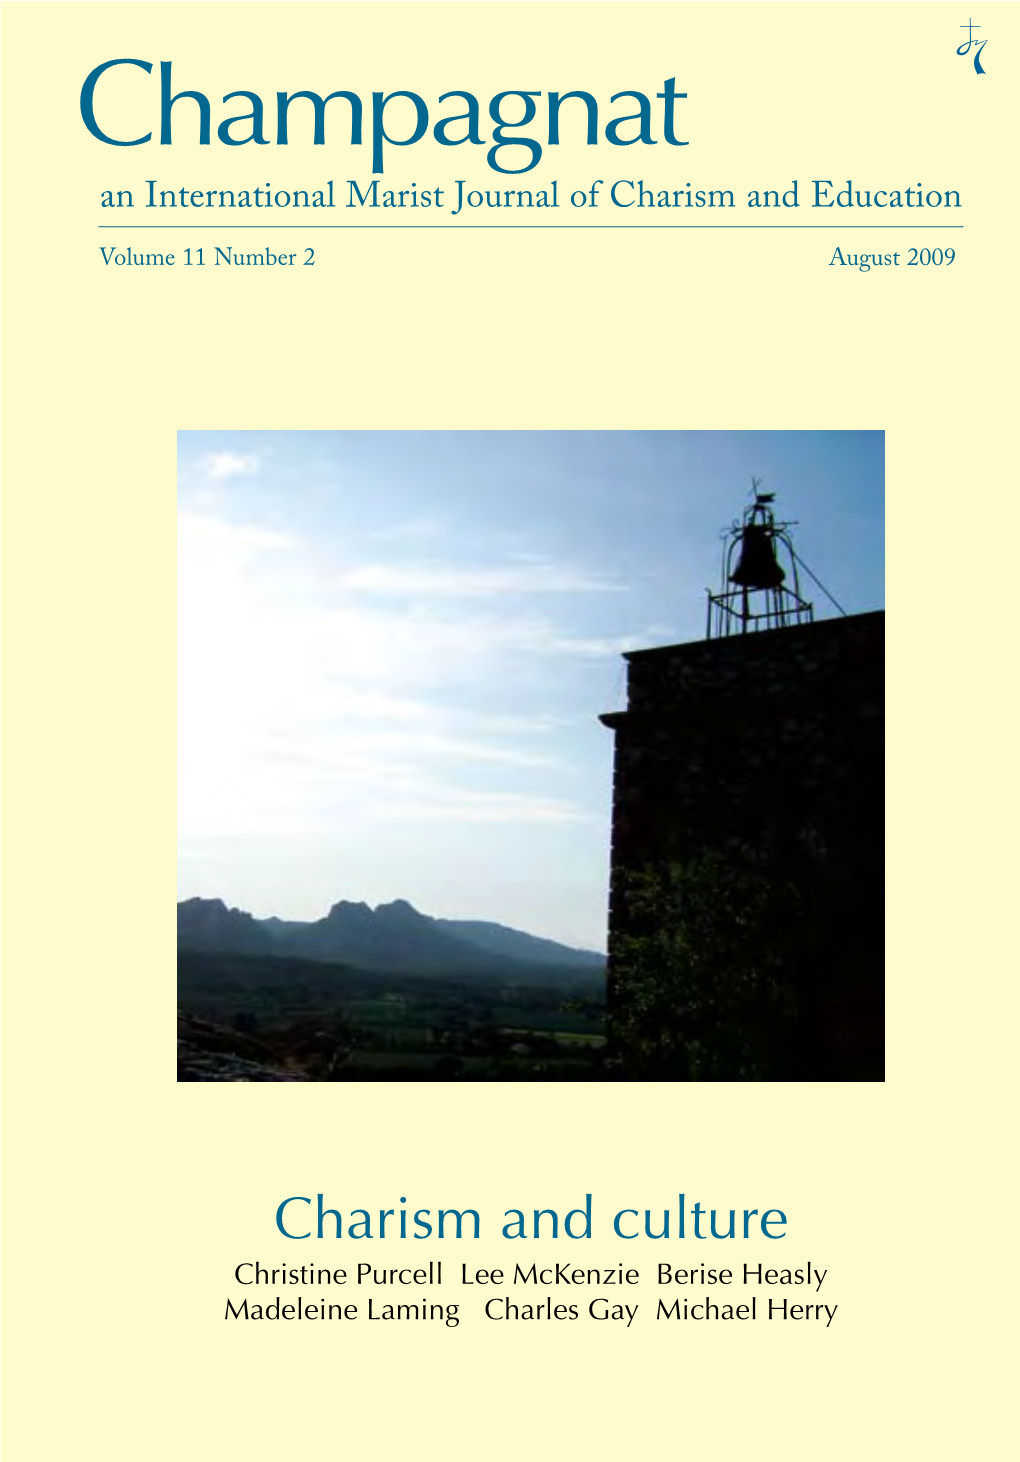 Champagnat: an Internationa Marist Journal of Charism and Education August 2009 Volume 11 Number 2 in THIS ISSUE … Charismjoin Our Conversation and Culture On